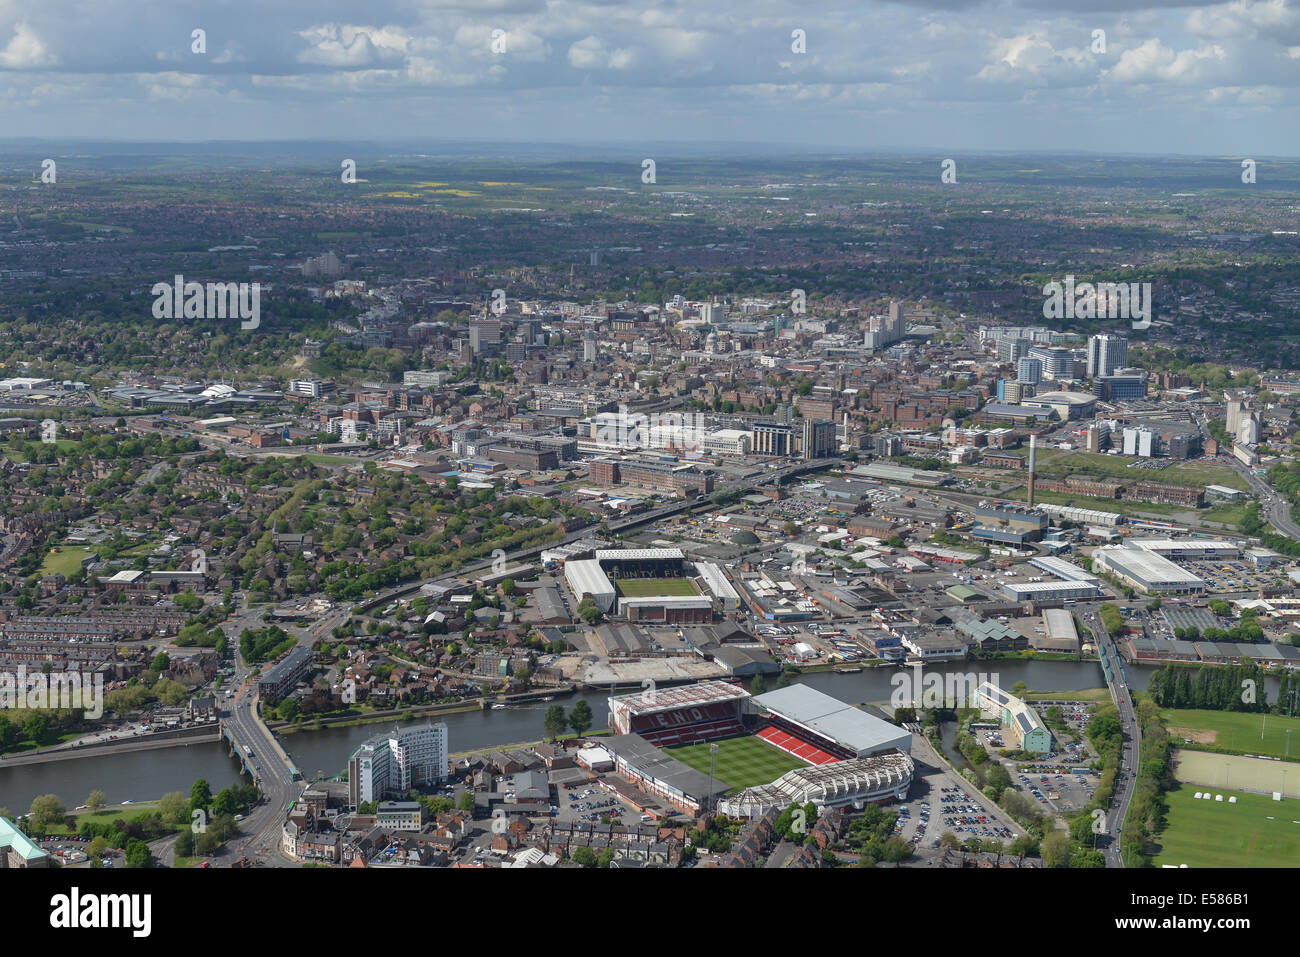 An aerial view looking from Trent Bridge, Nottingham. Both football grounds and the cricket ground visible, city centre behind. Stock Photo